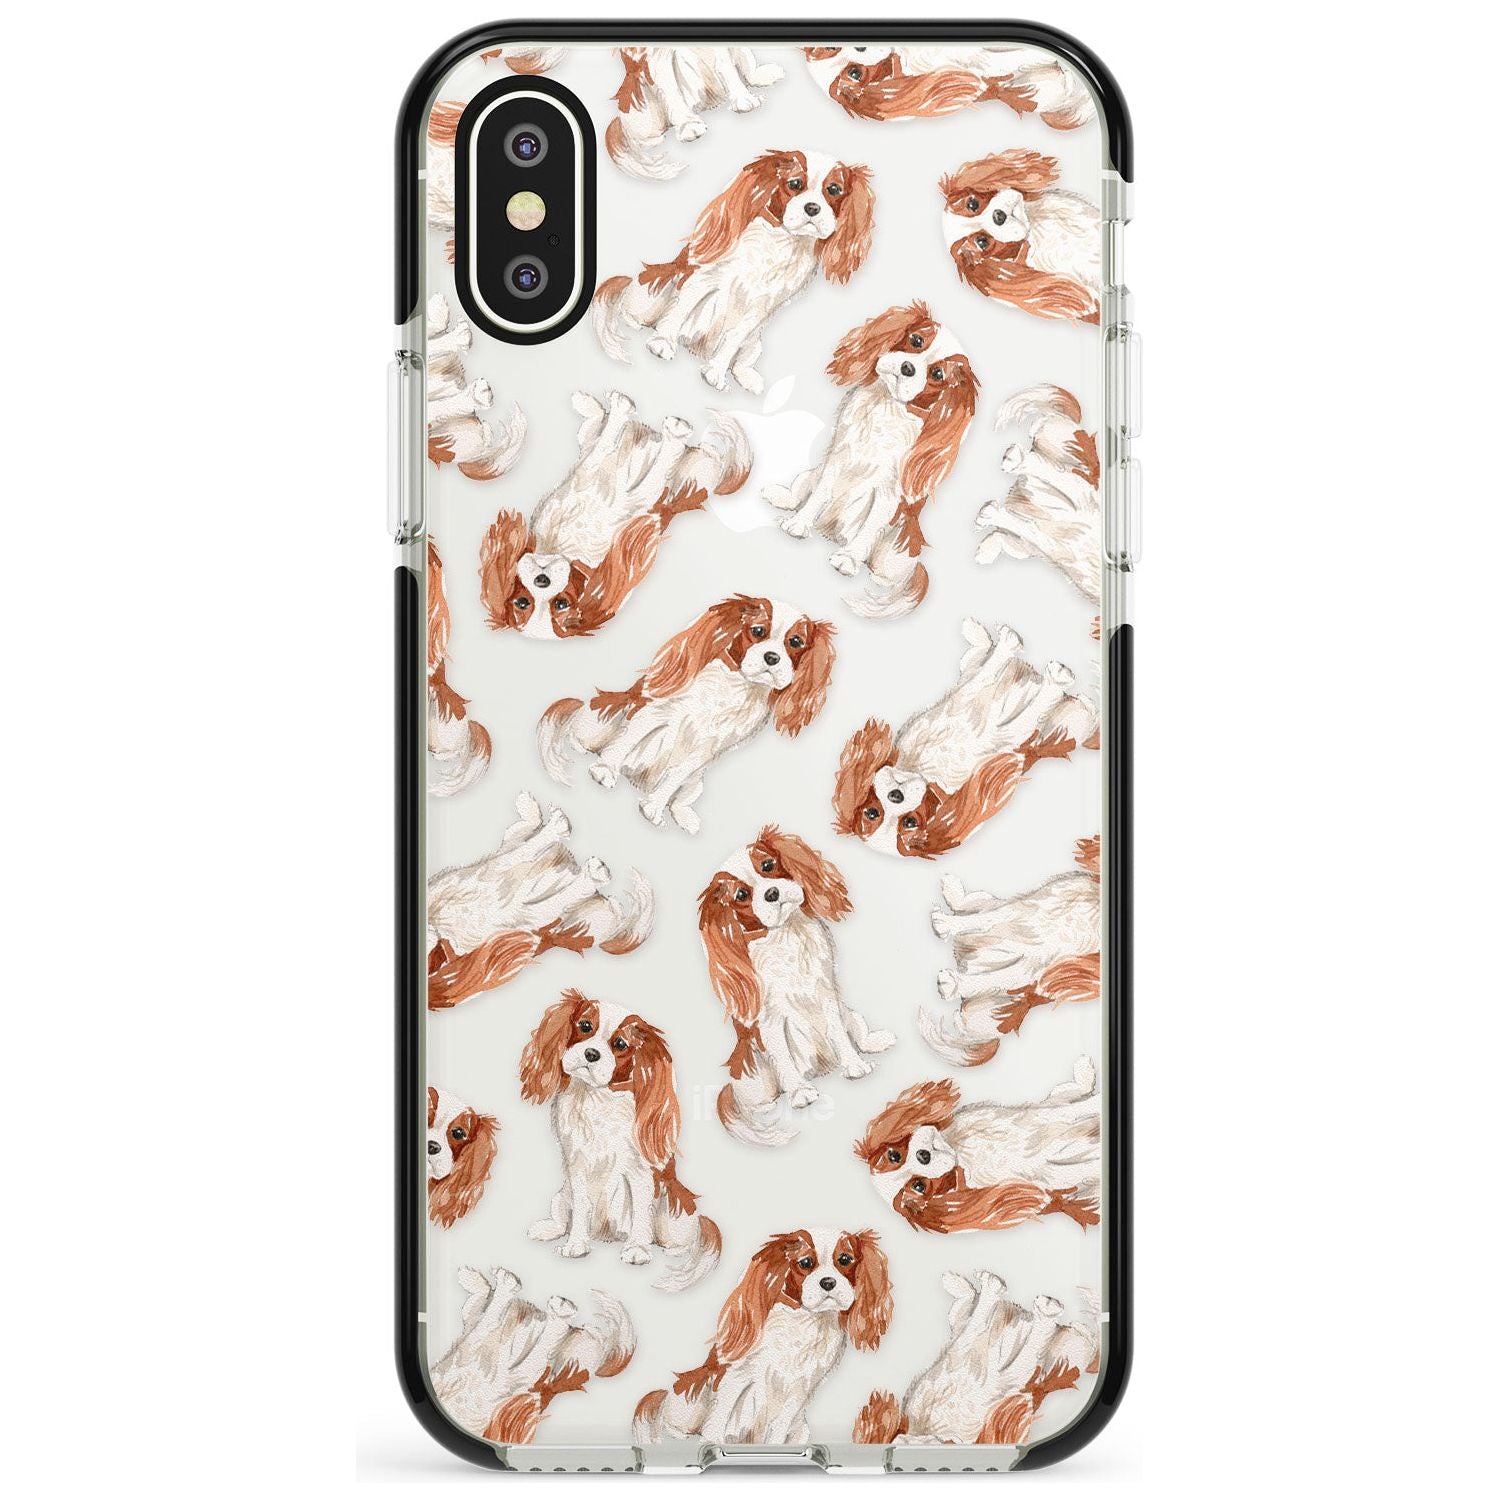 Cavalier King Charles Spaniel Dog Pattern Black Impact Phone Case for iPhone X XS Max XR